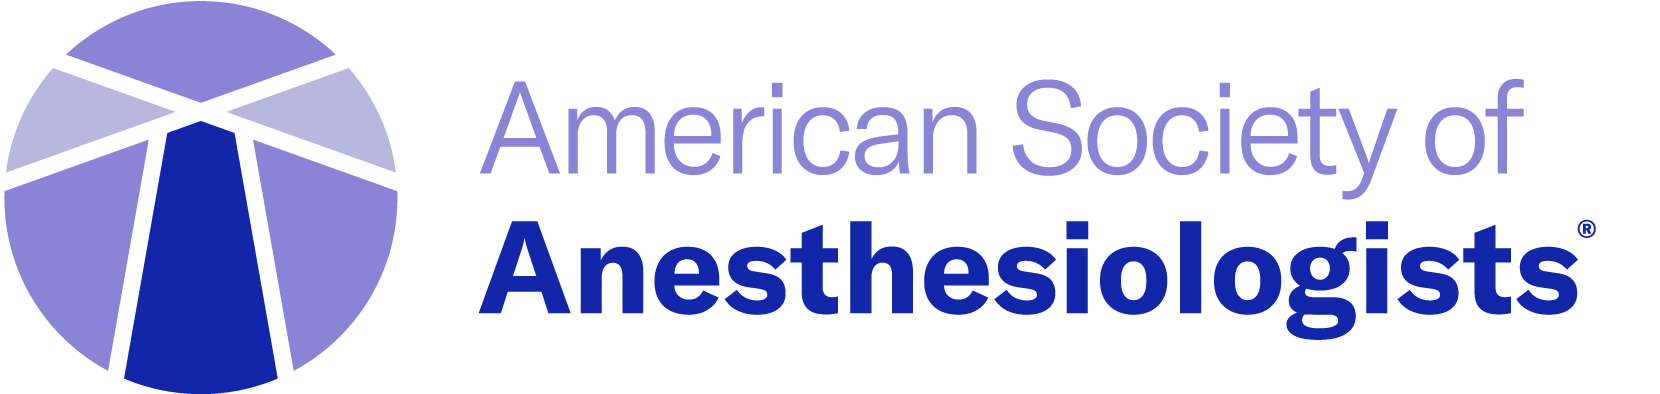 American Society of Anesthesiologists (ASA)